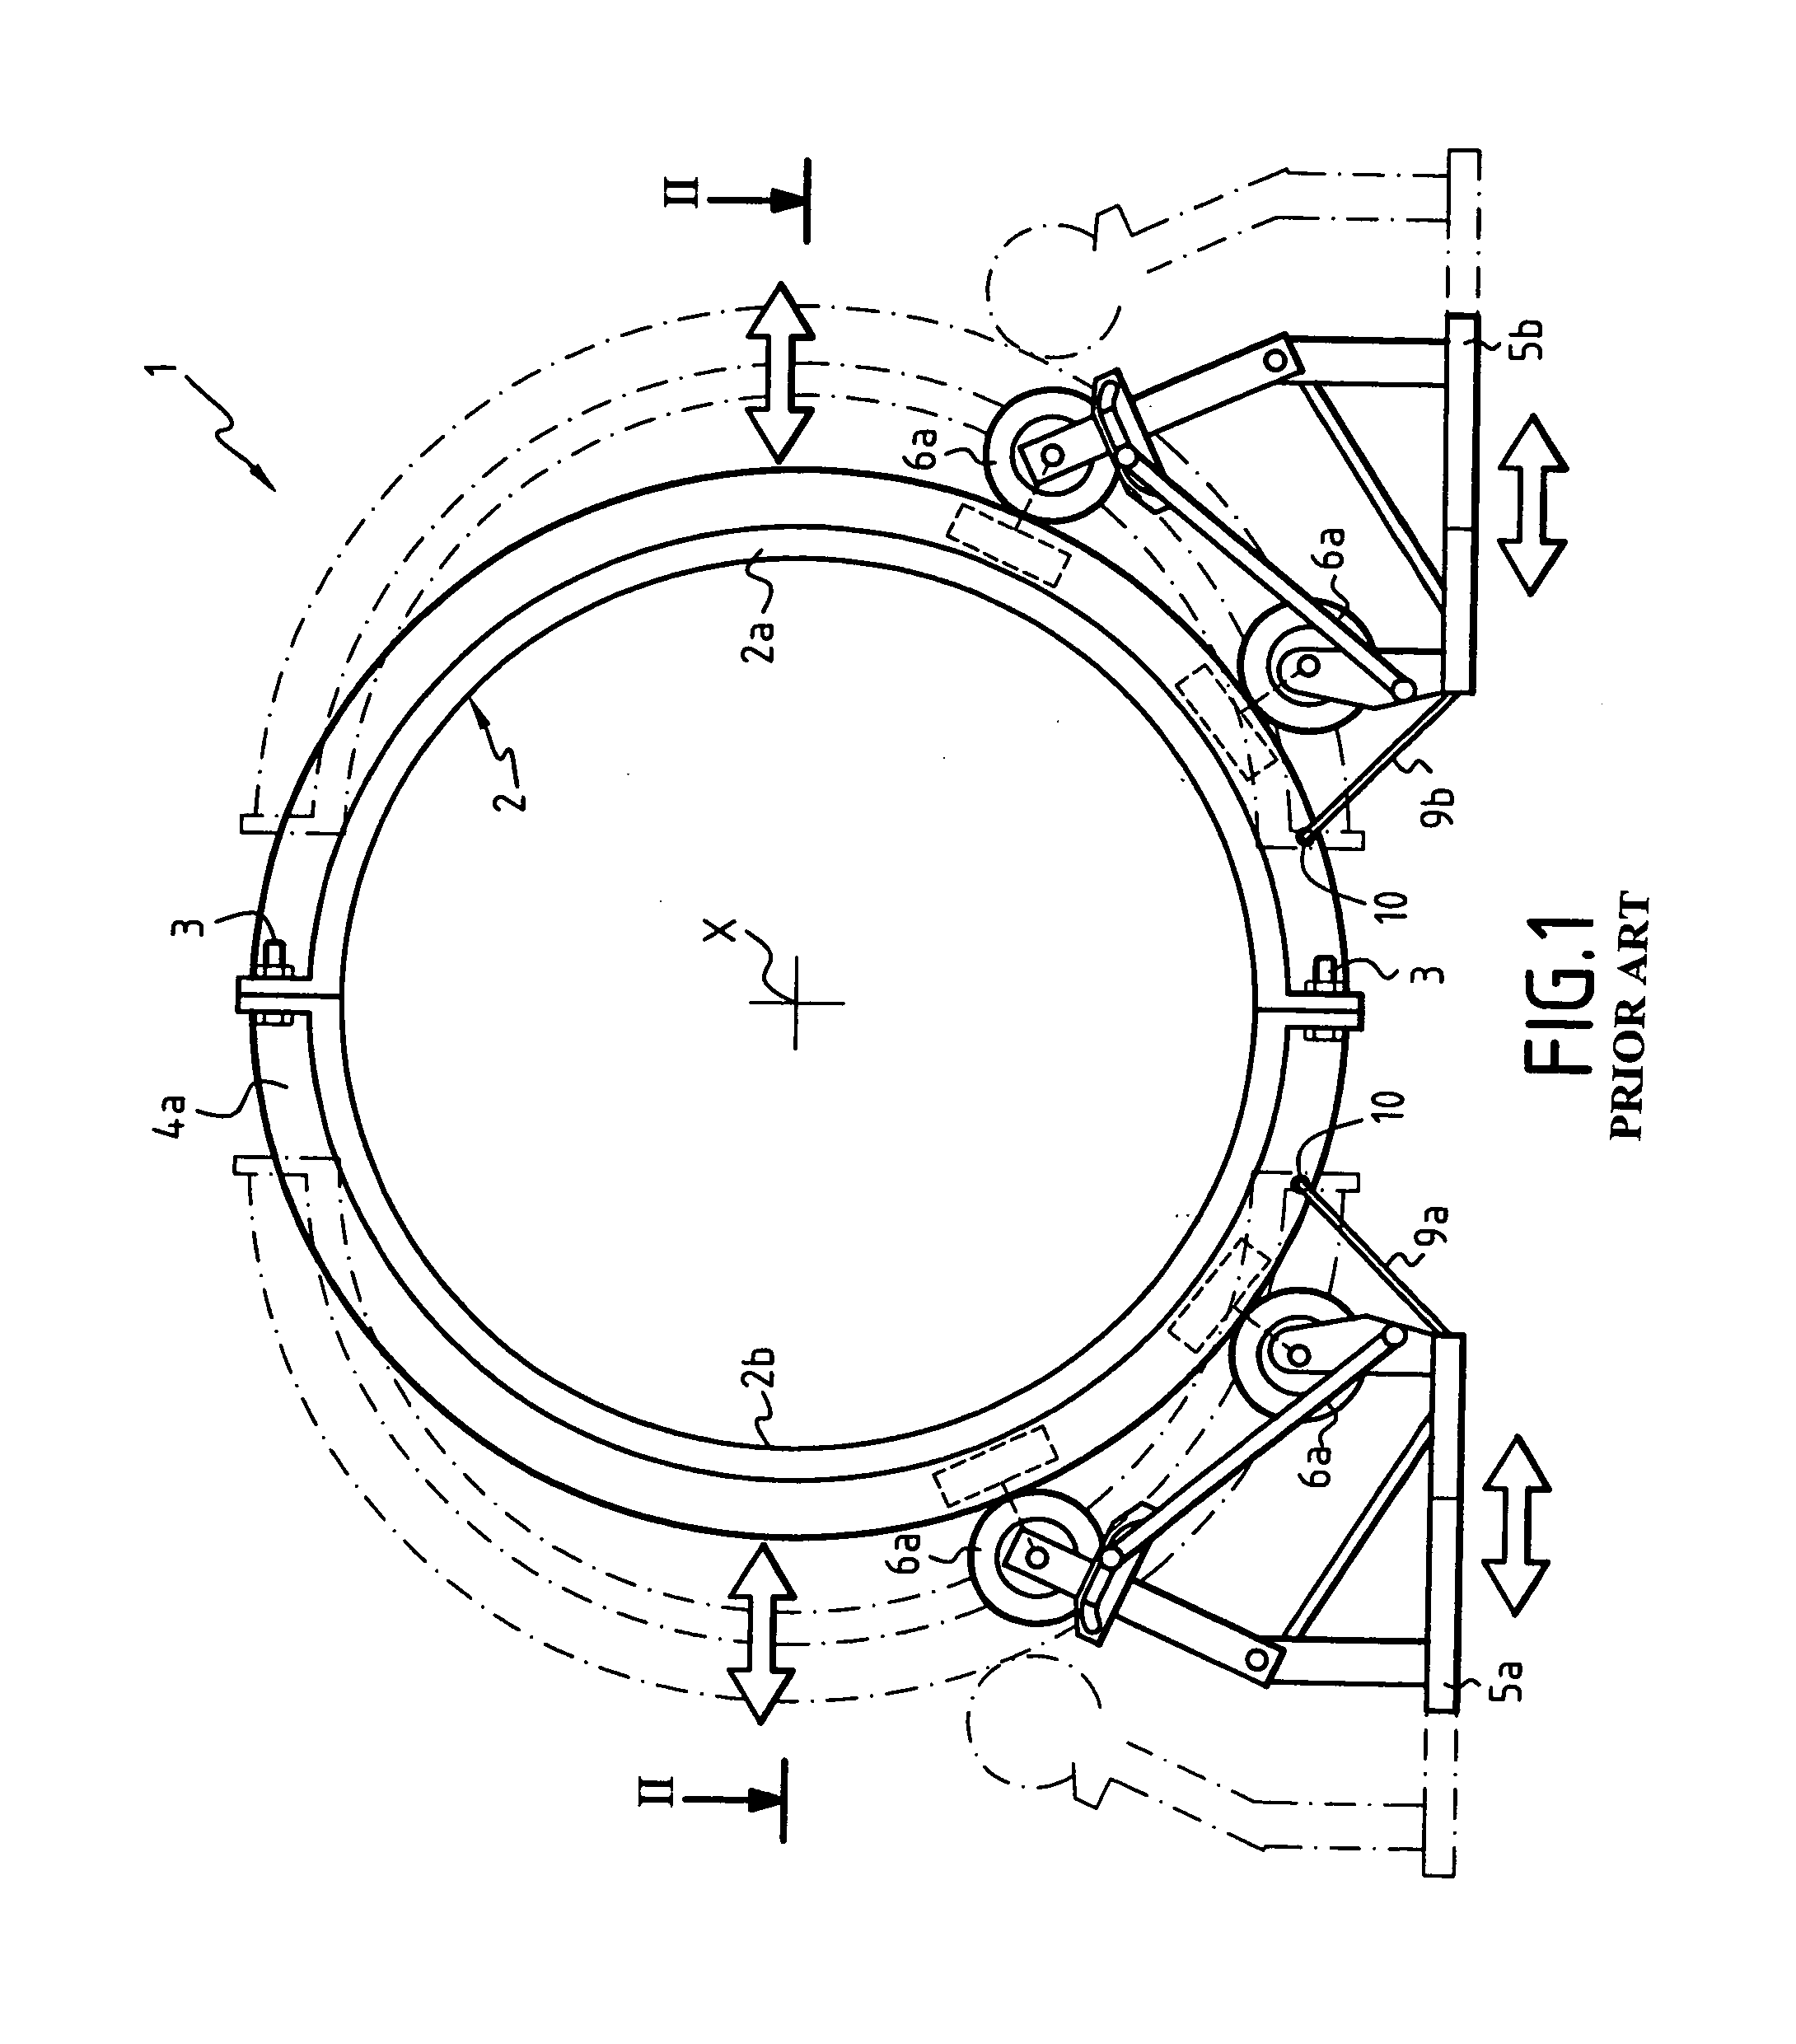 Method for making double-wall shells by centrifuging